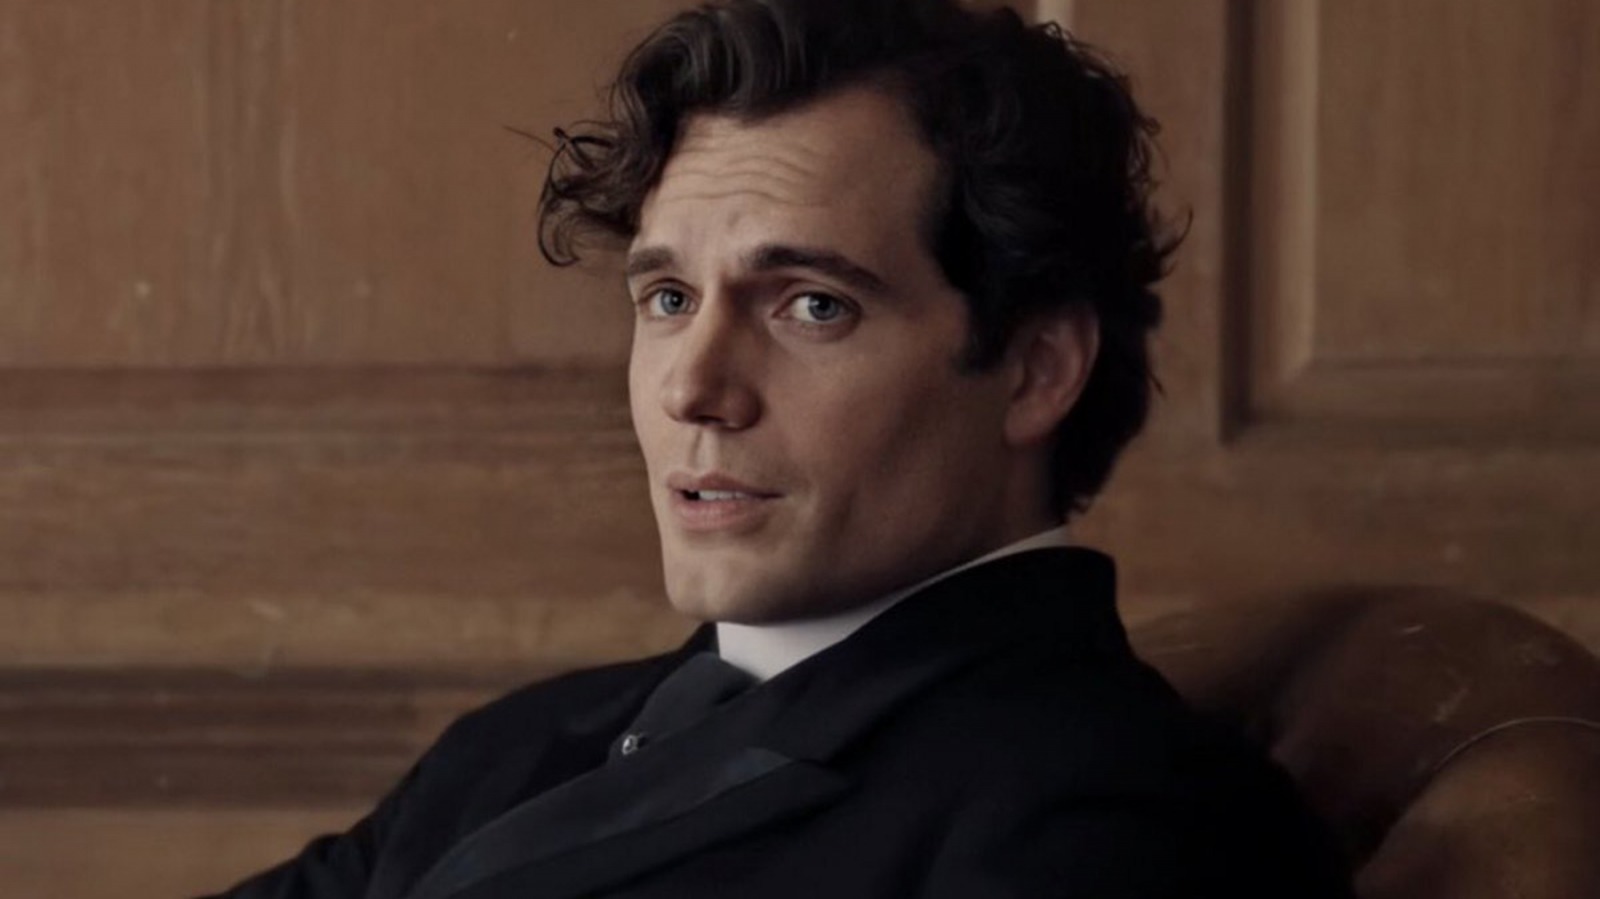 The Real Reason Henry Cavill Was Cast In Enola Holmes - Exclusive